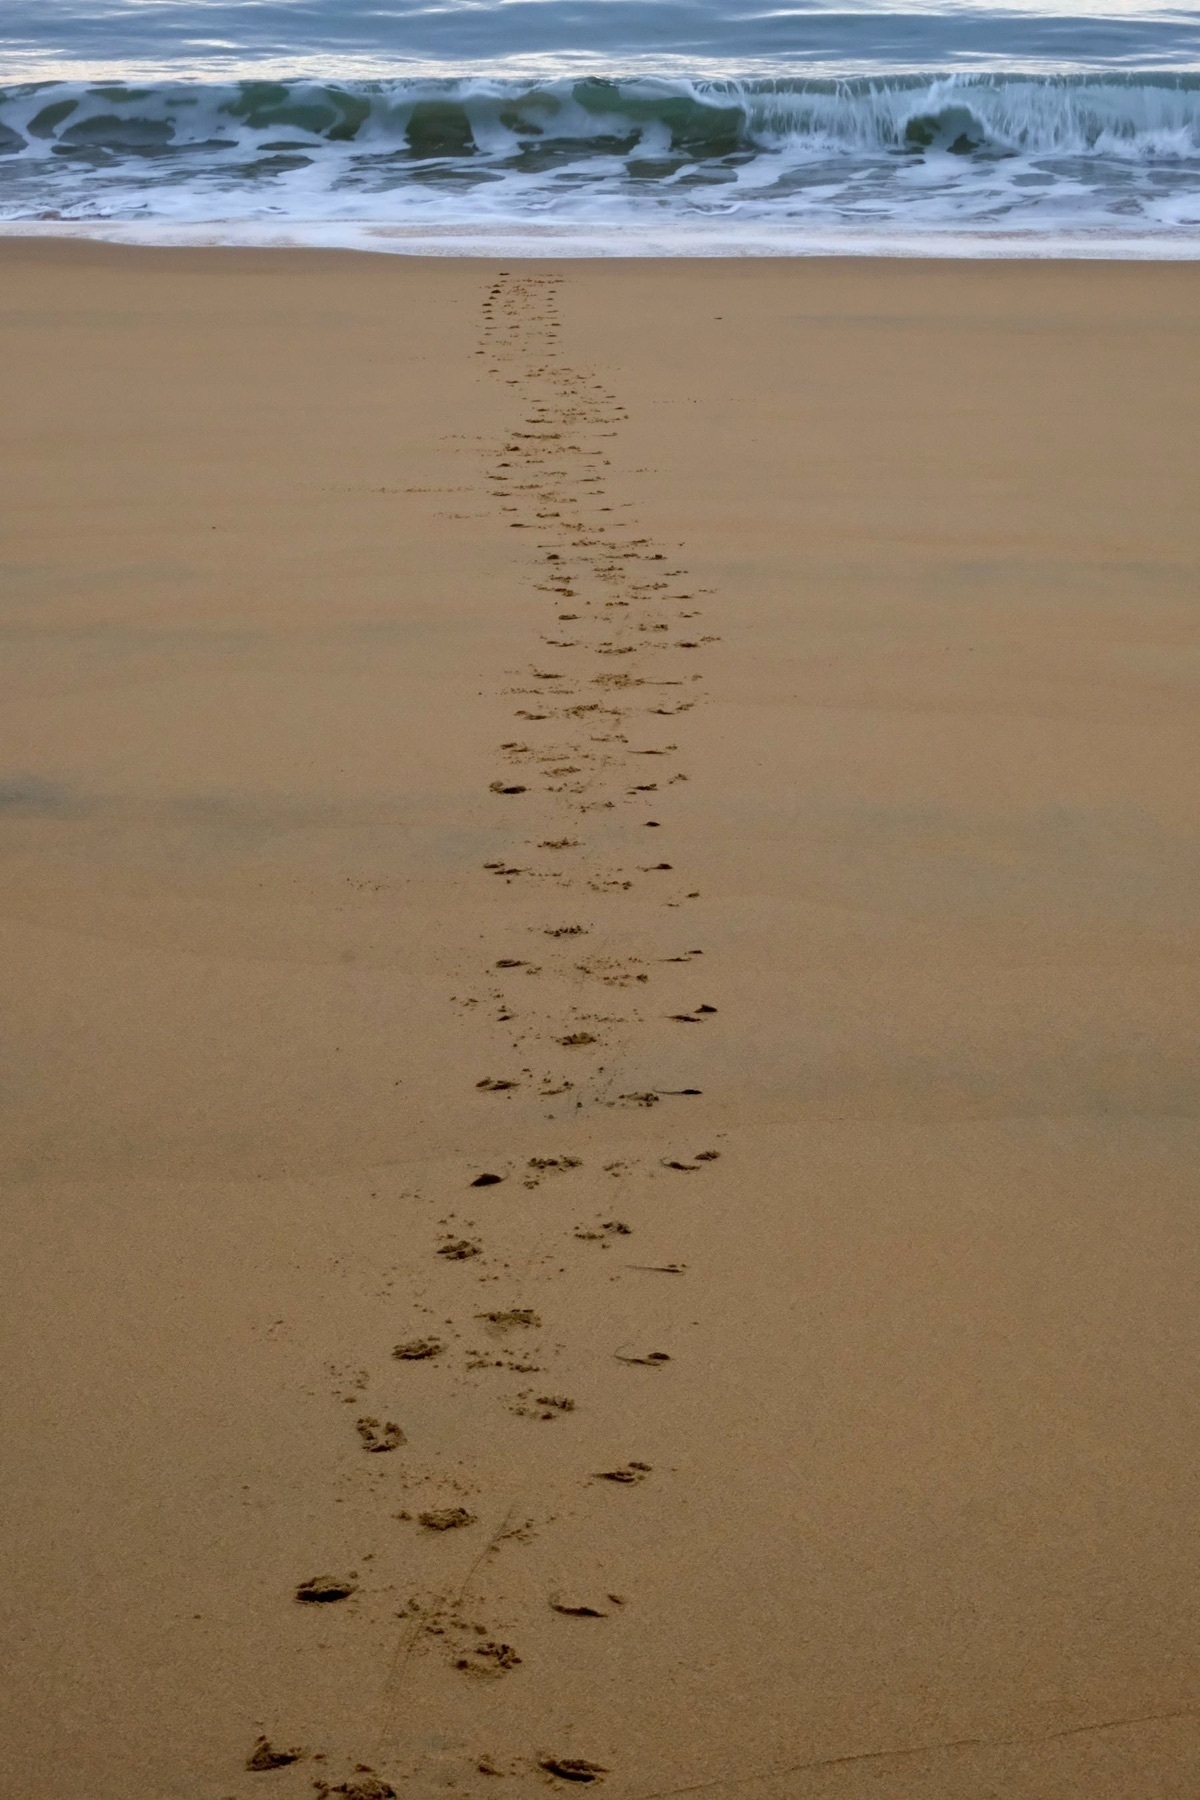 Track from a penguin crossing the beach. 